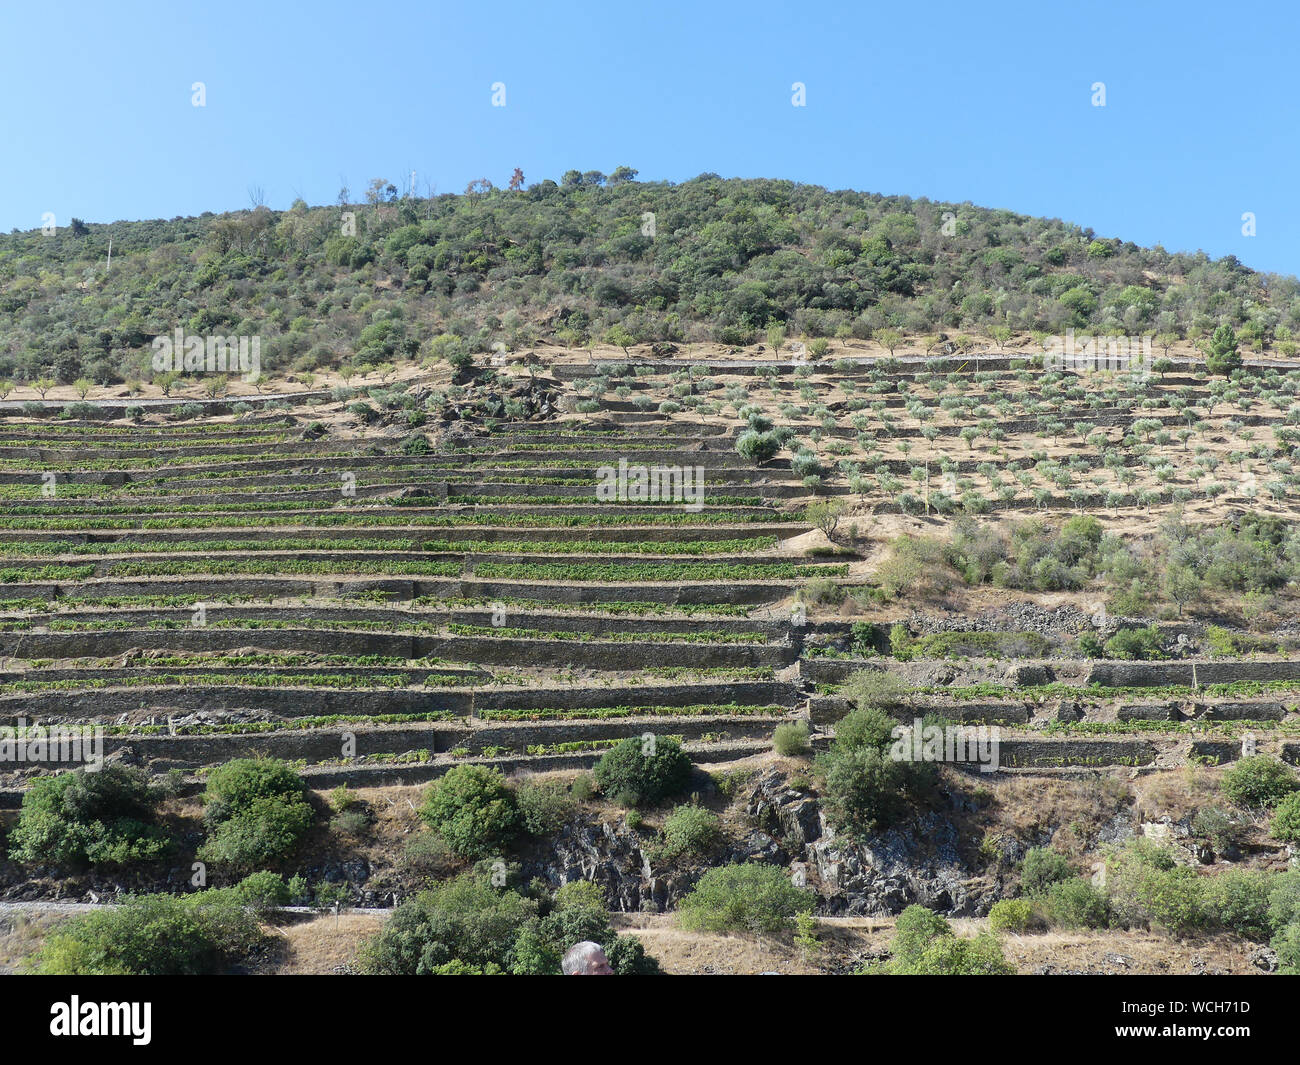 VINYARDS in the Douro River valley in Portugal. Photo: Tony Gale Stock Photo